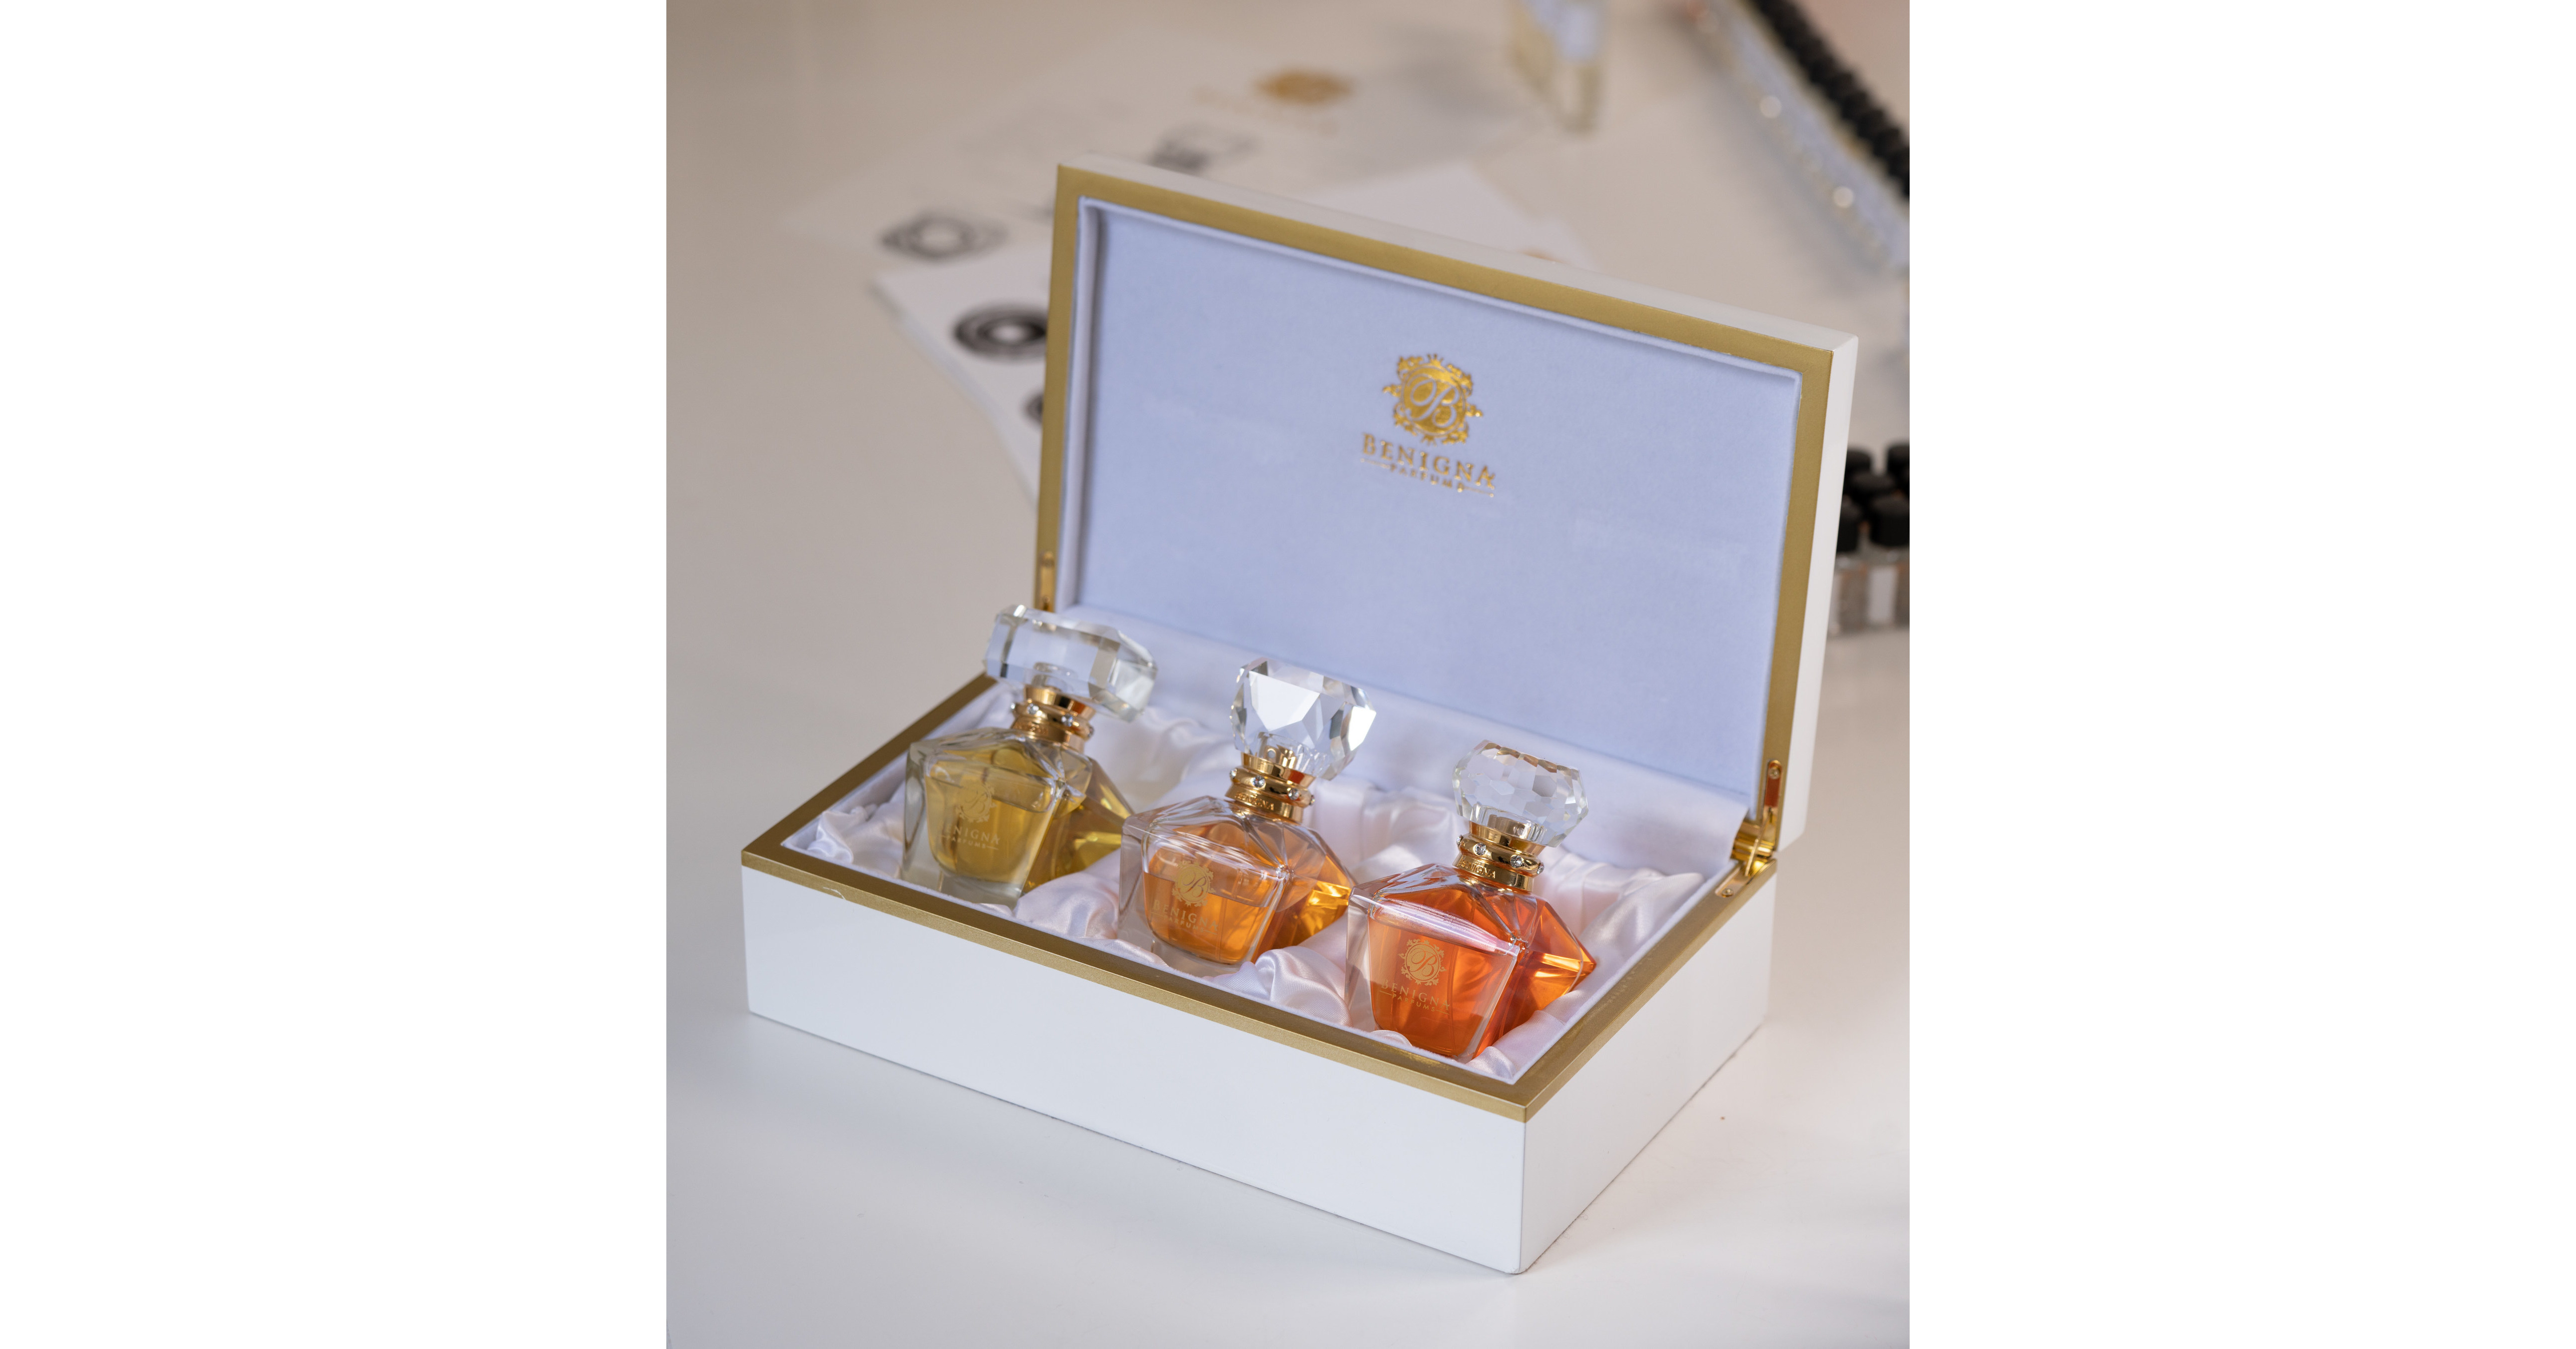 Flying Through Clouds of Soft Floral Scent - Benigna Parfums Takes to ...